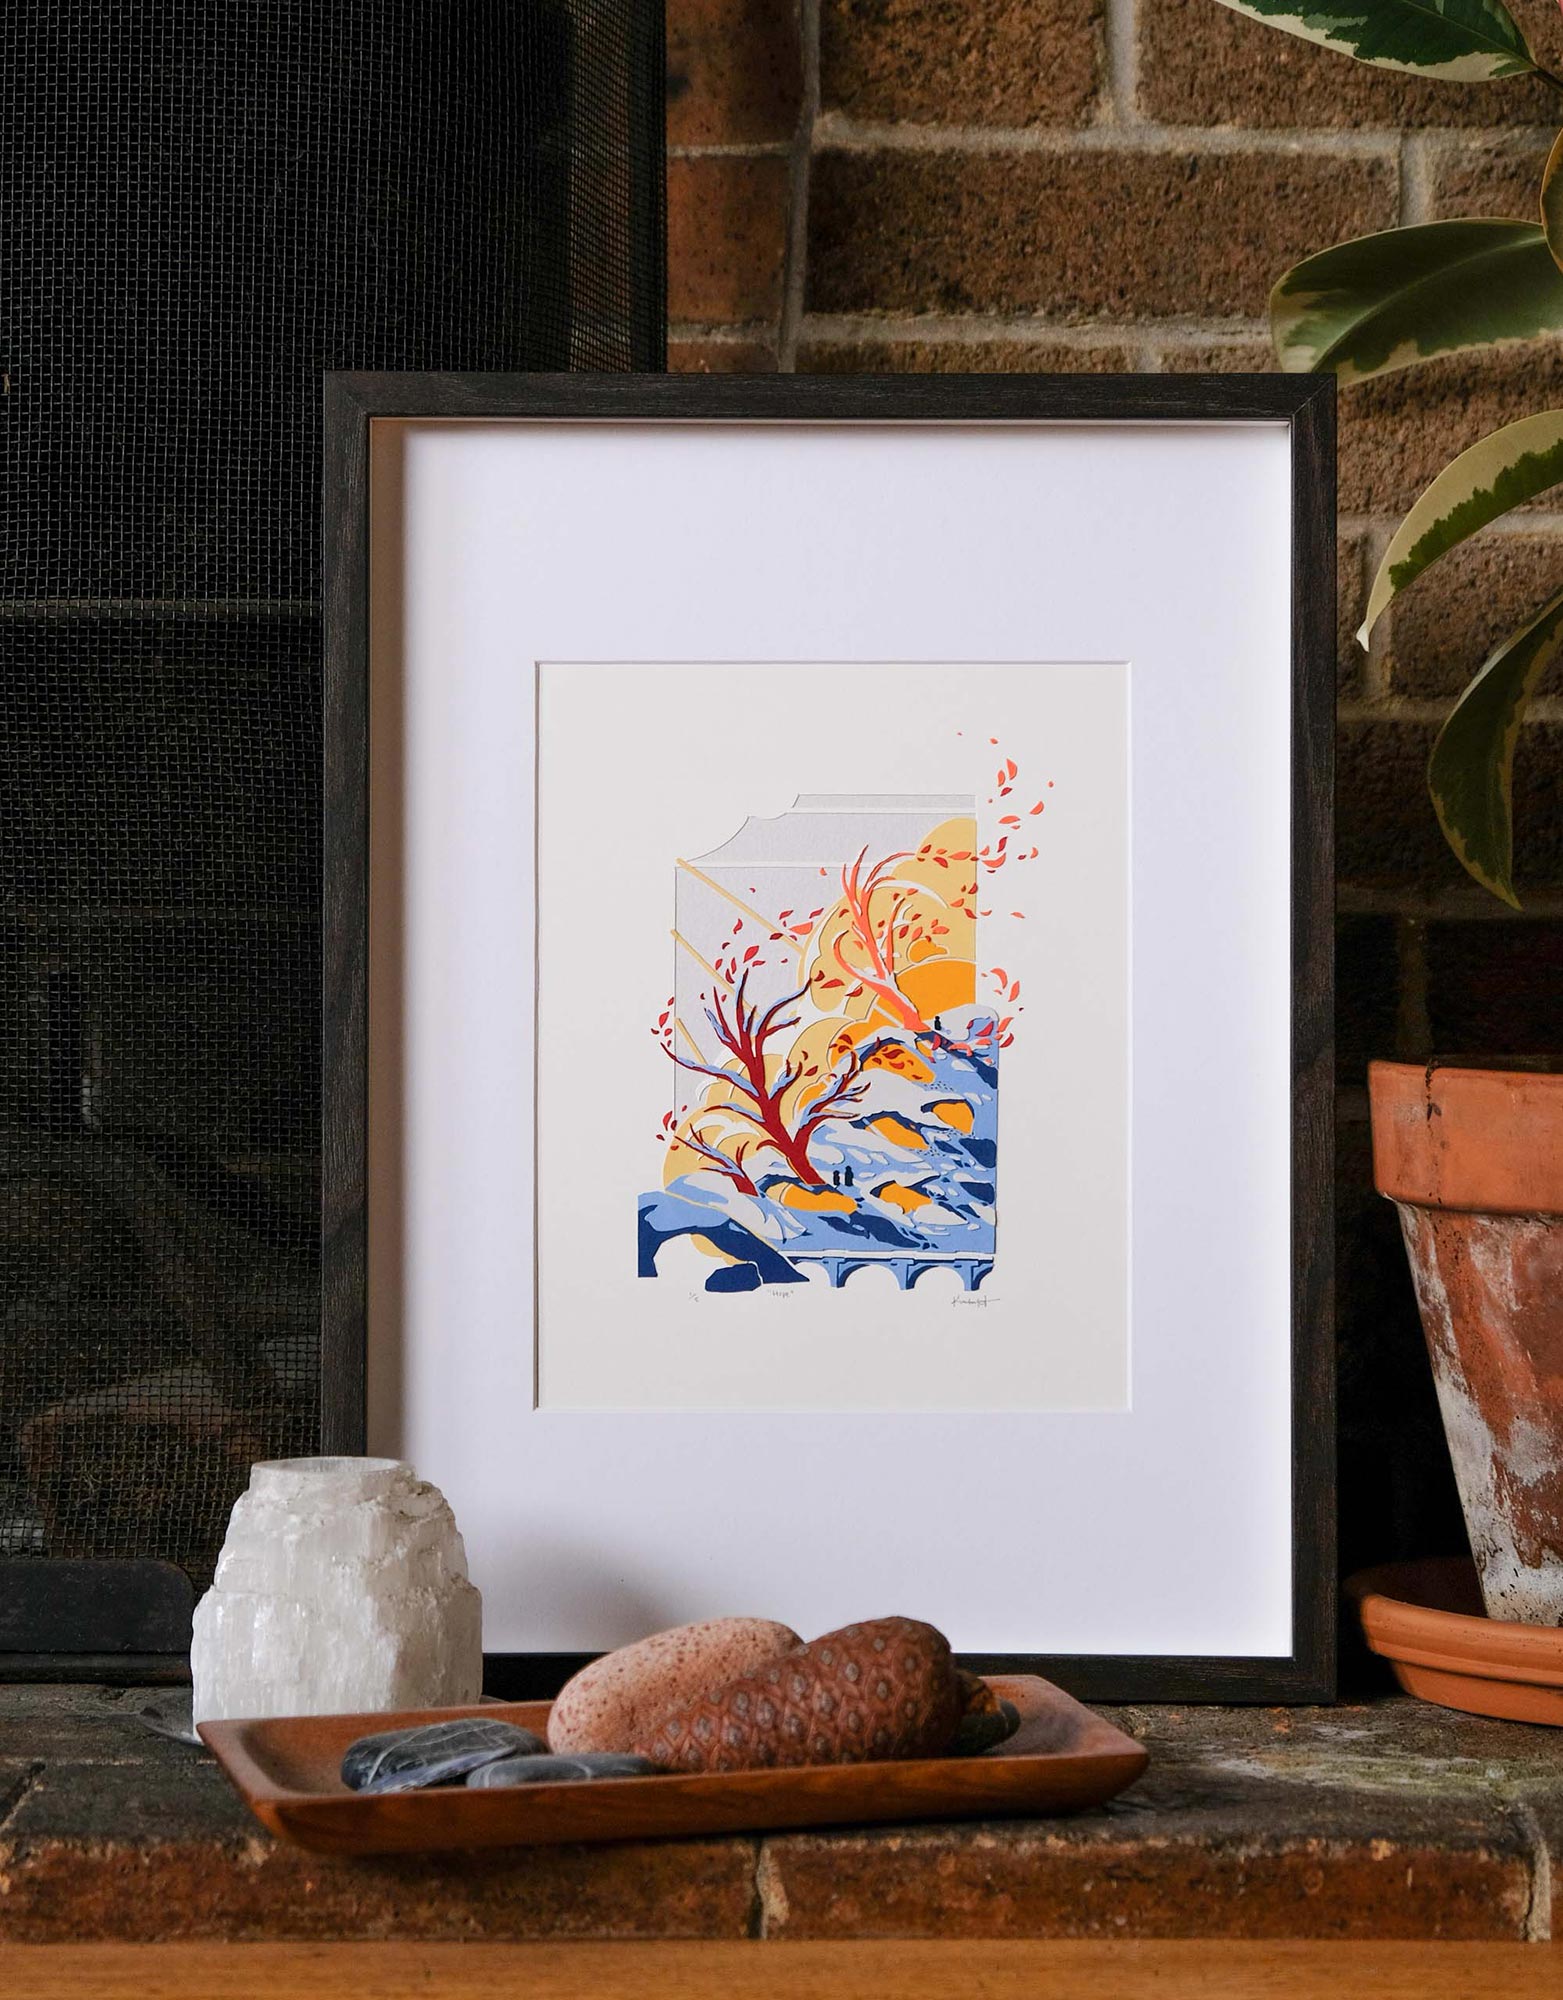 A framed piece of artwork sits on a wood floor in a living room. Within the frame, red and orange trees perch on a rugged winter landscape in front of a rising sun.